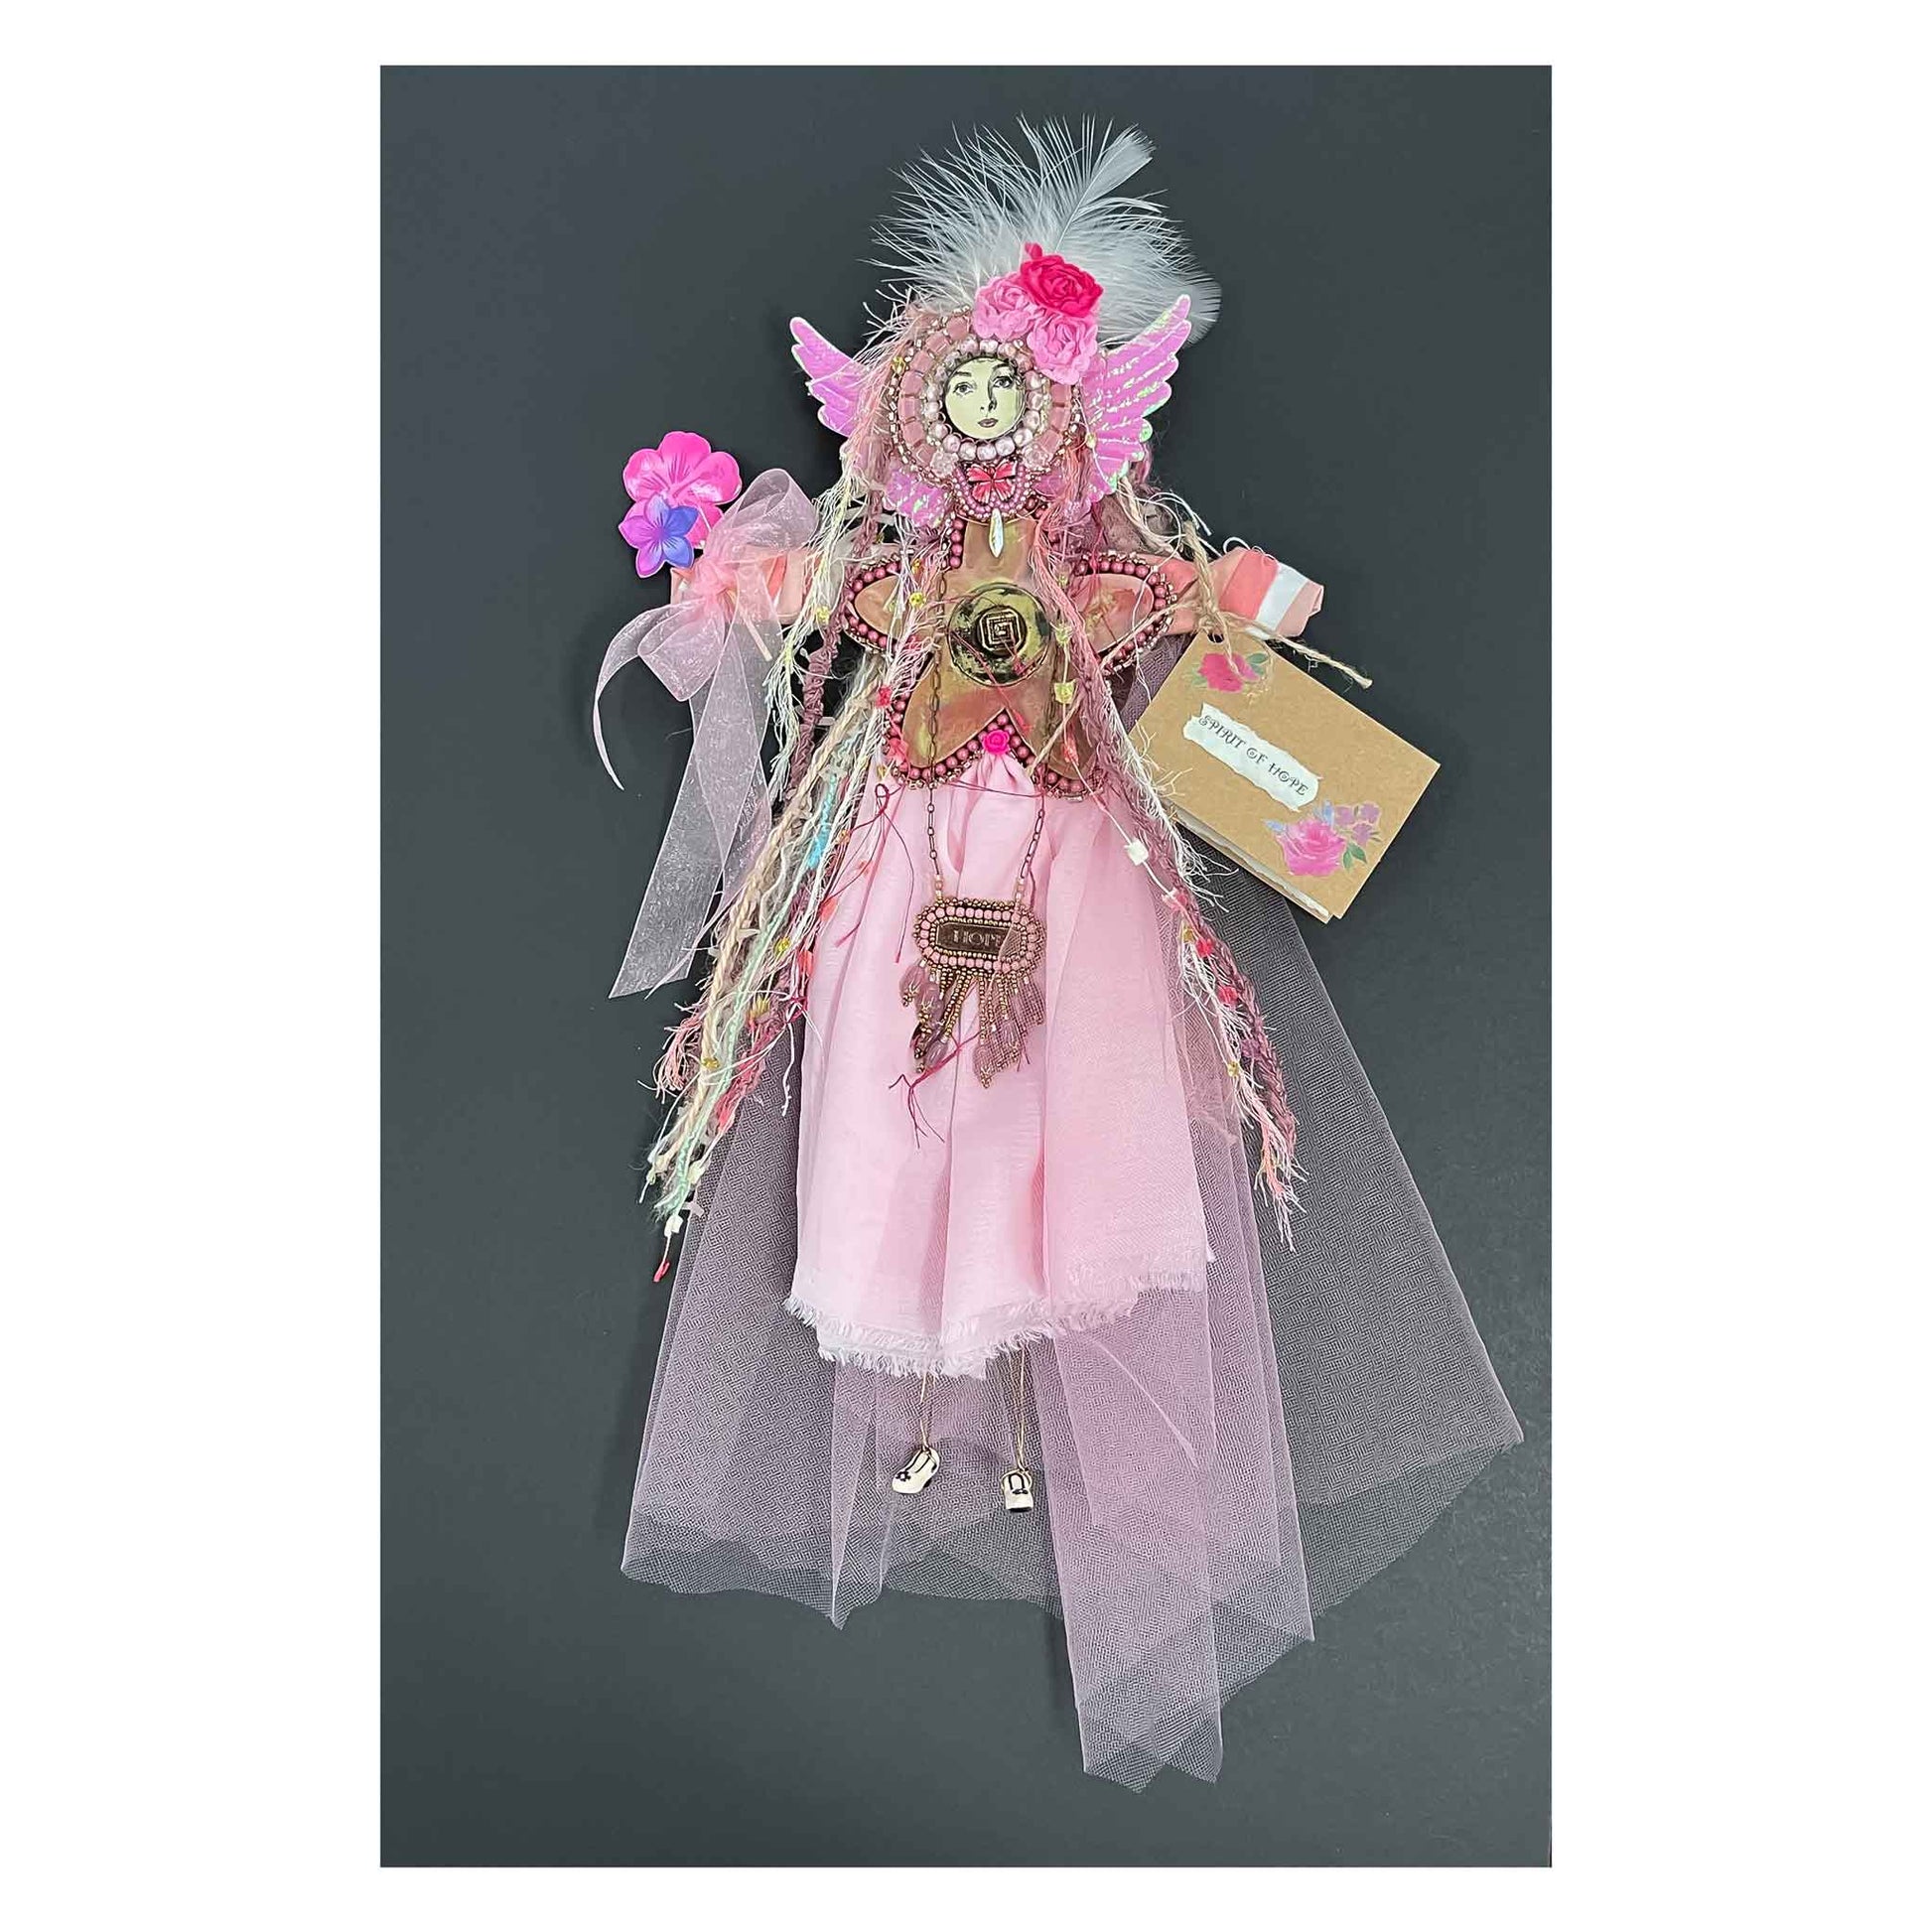 Doll, Spirit of Hope,  pink chiffon,  bead embroidery, encaustic, painted wood, ceramic shoes, flowers, a butterfly. a necklace, wings, wire, fabric, yarn, feathers, 16 X 9